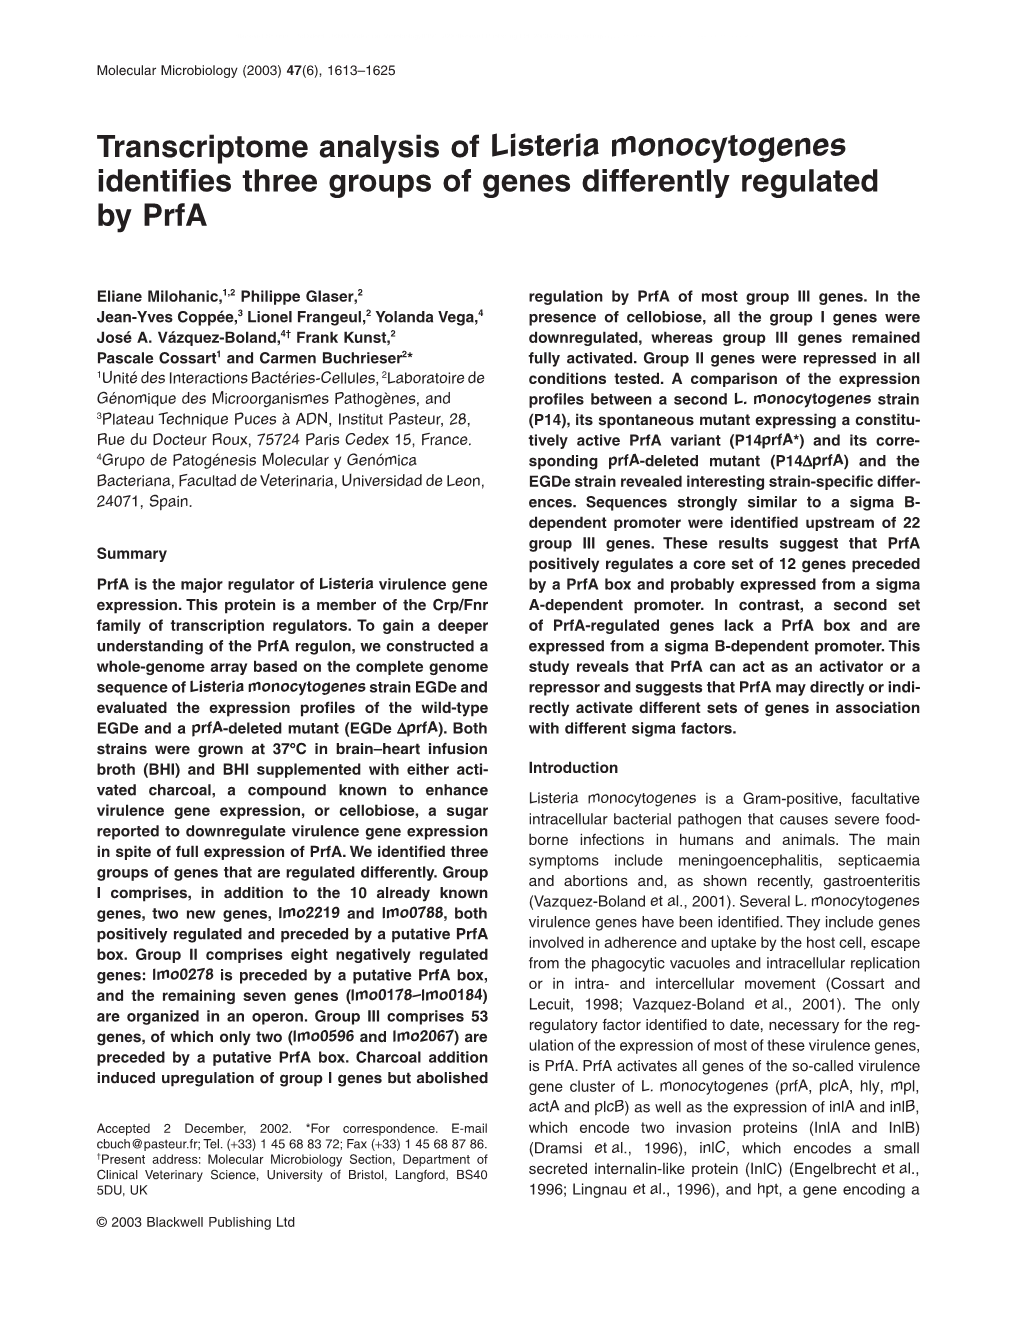 Transcriptome Analysis of Listeria Monocytogenes Identifies Three Groups of Genes Differently Regulated by Prfa